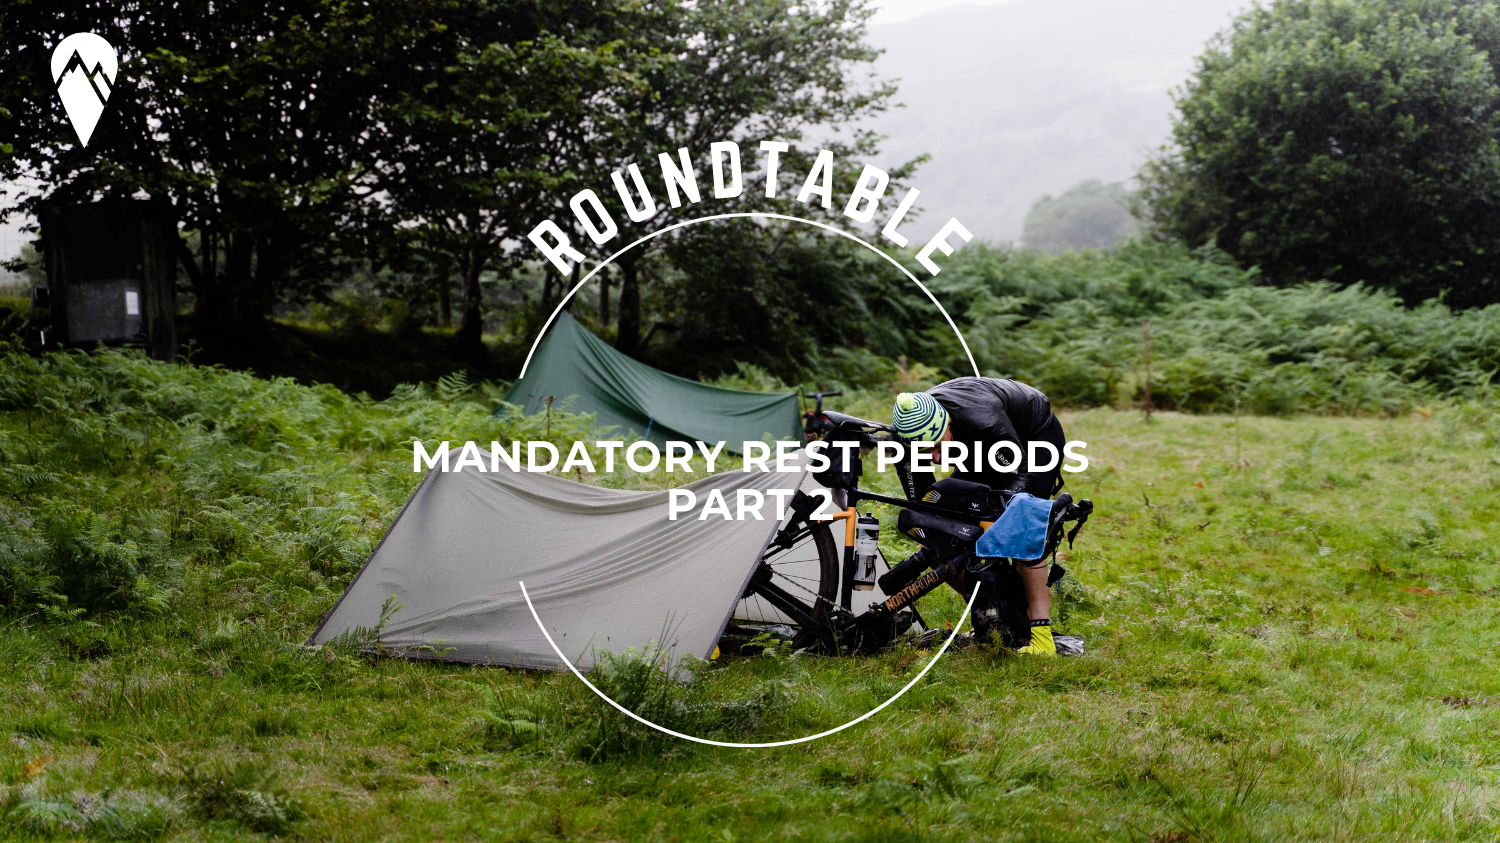 Roundtable: Mandatory Rest Periods - Part 2